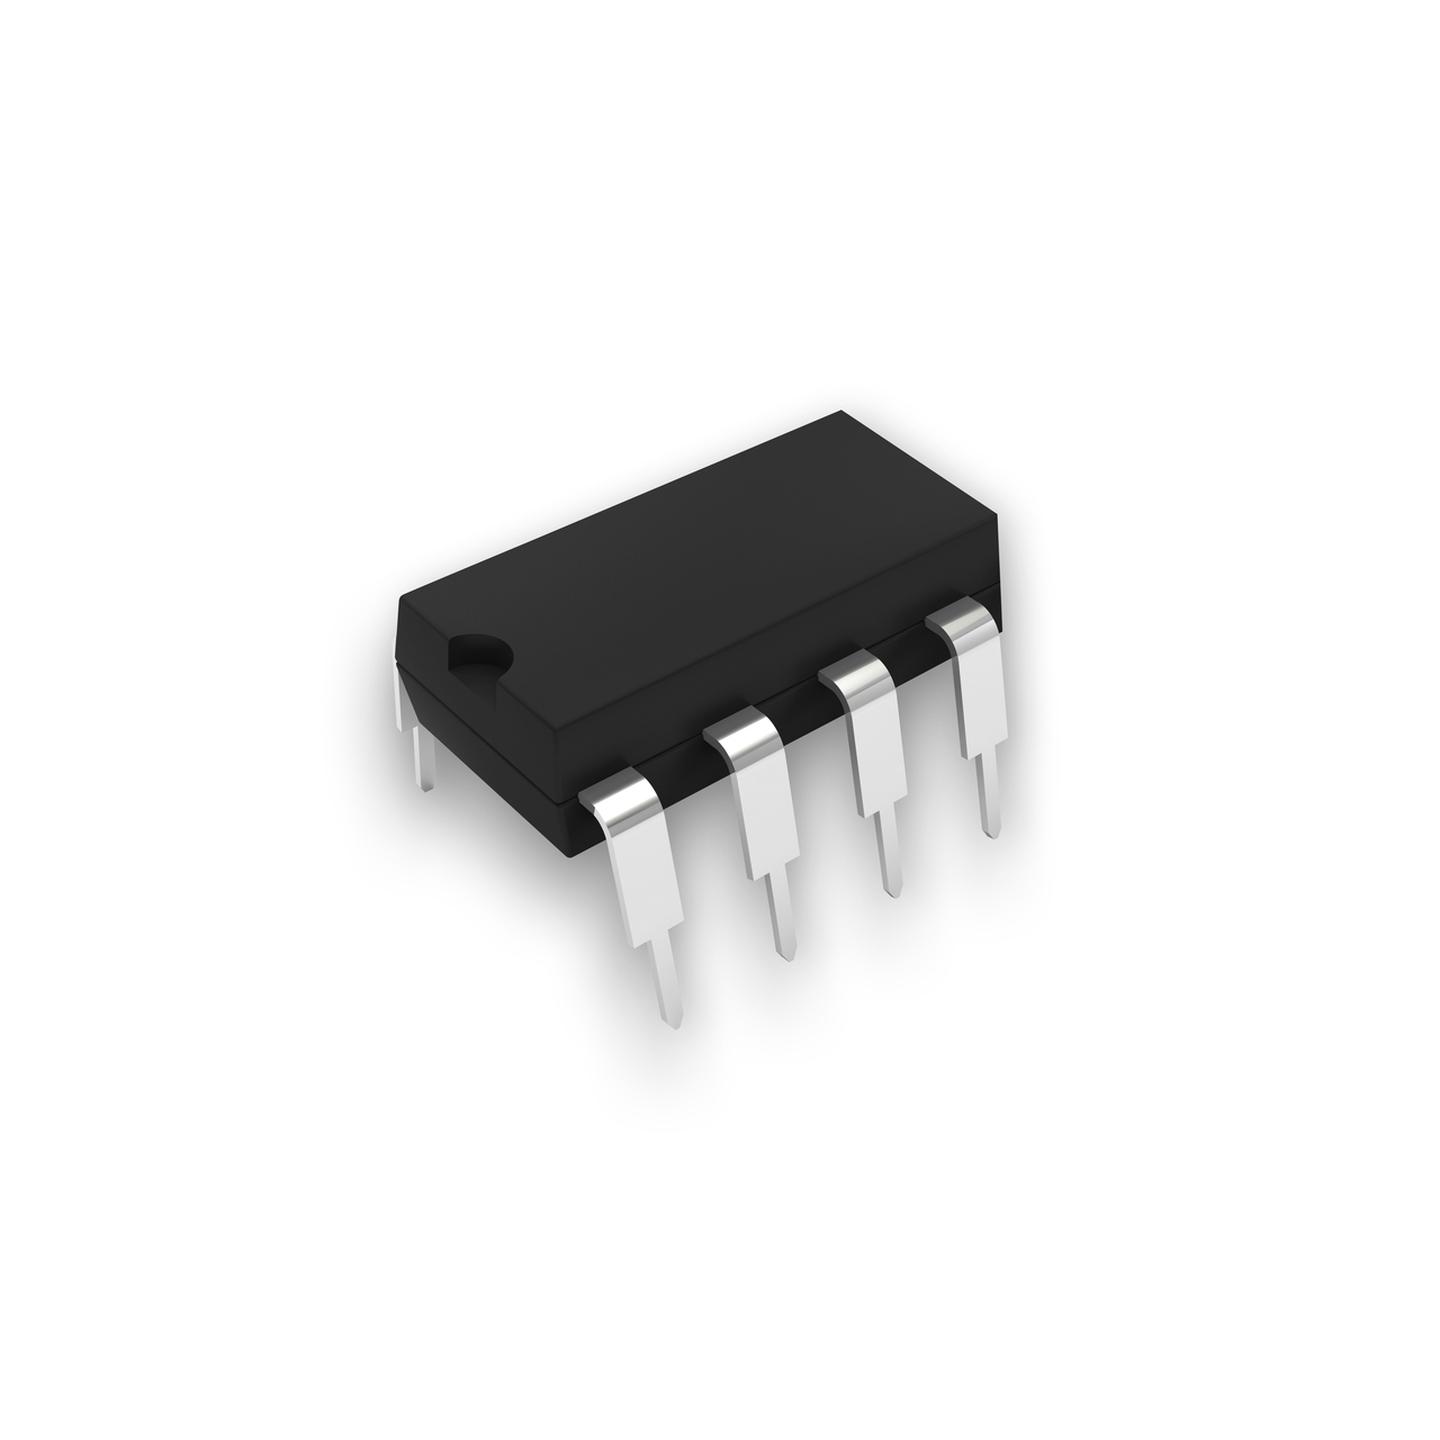 LM567 Low Power Tone Decoder Linear IC